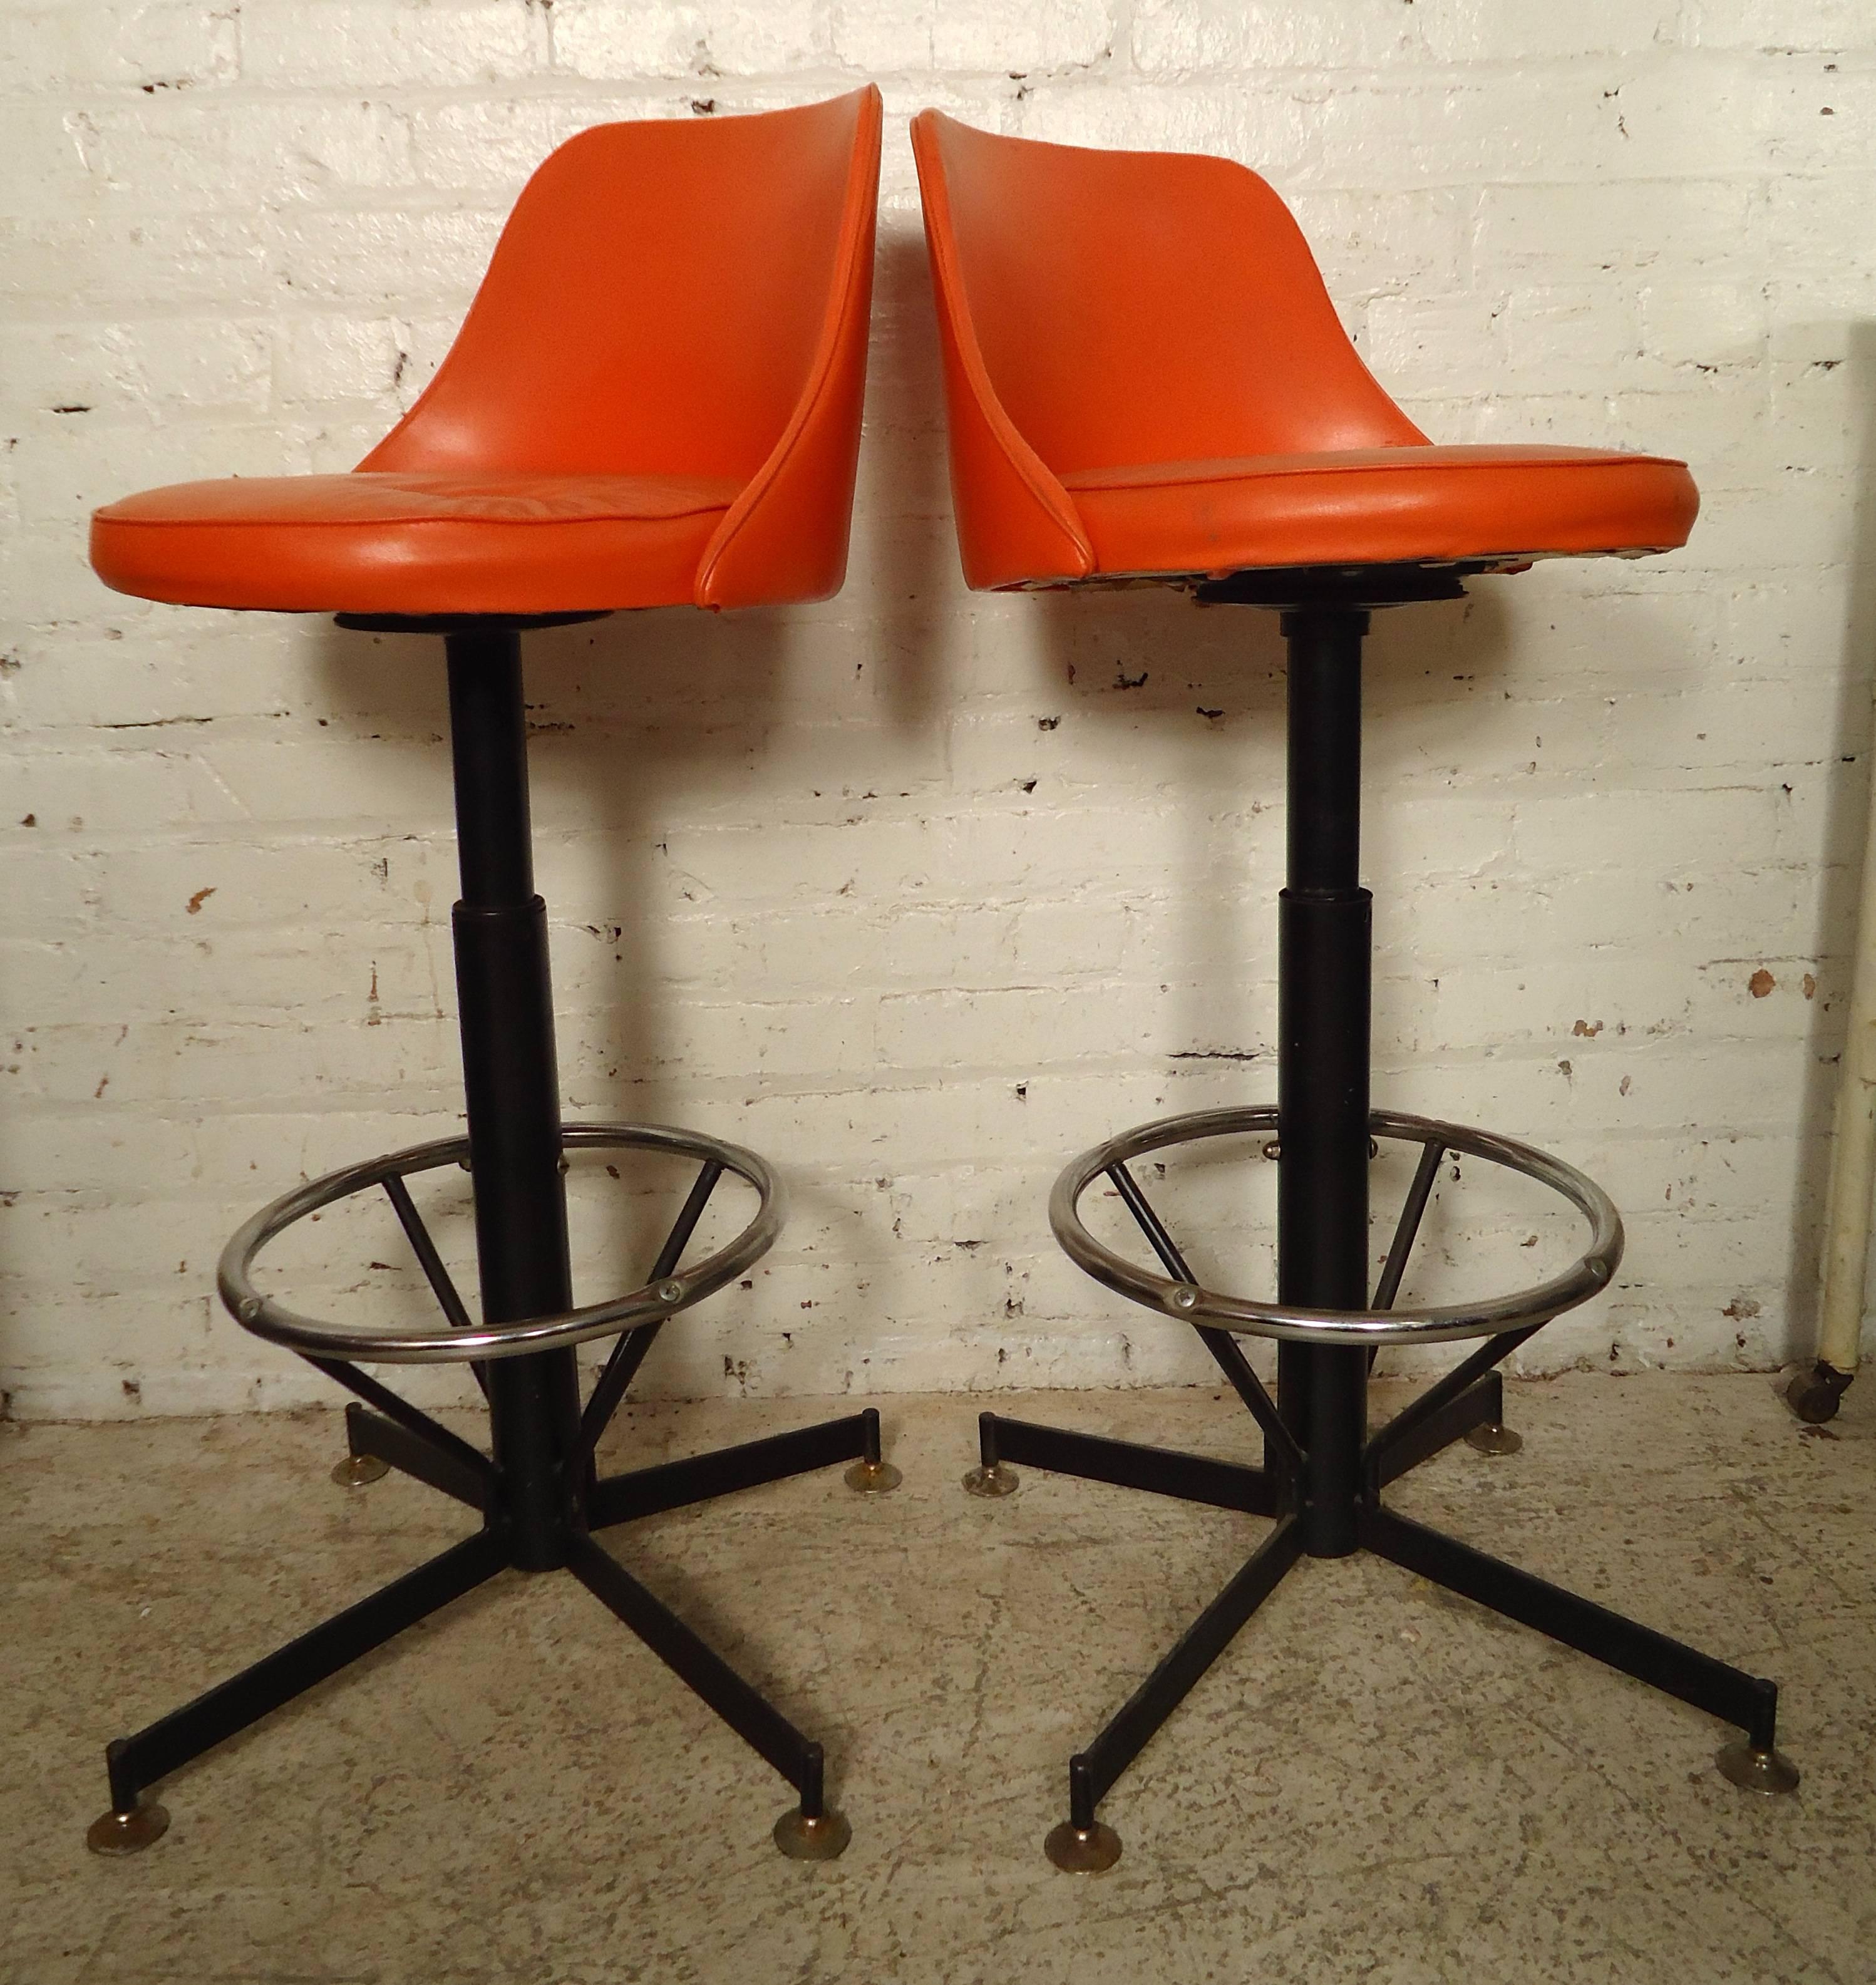 Pair of vintage modern swivel stools in orange vinyl with adjustable seat height set on a sturdy base.

Please confirm item location (NY or NJ) with dealer.